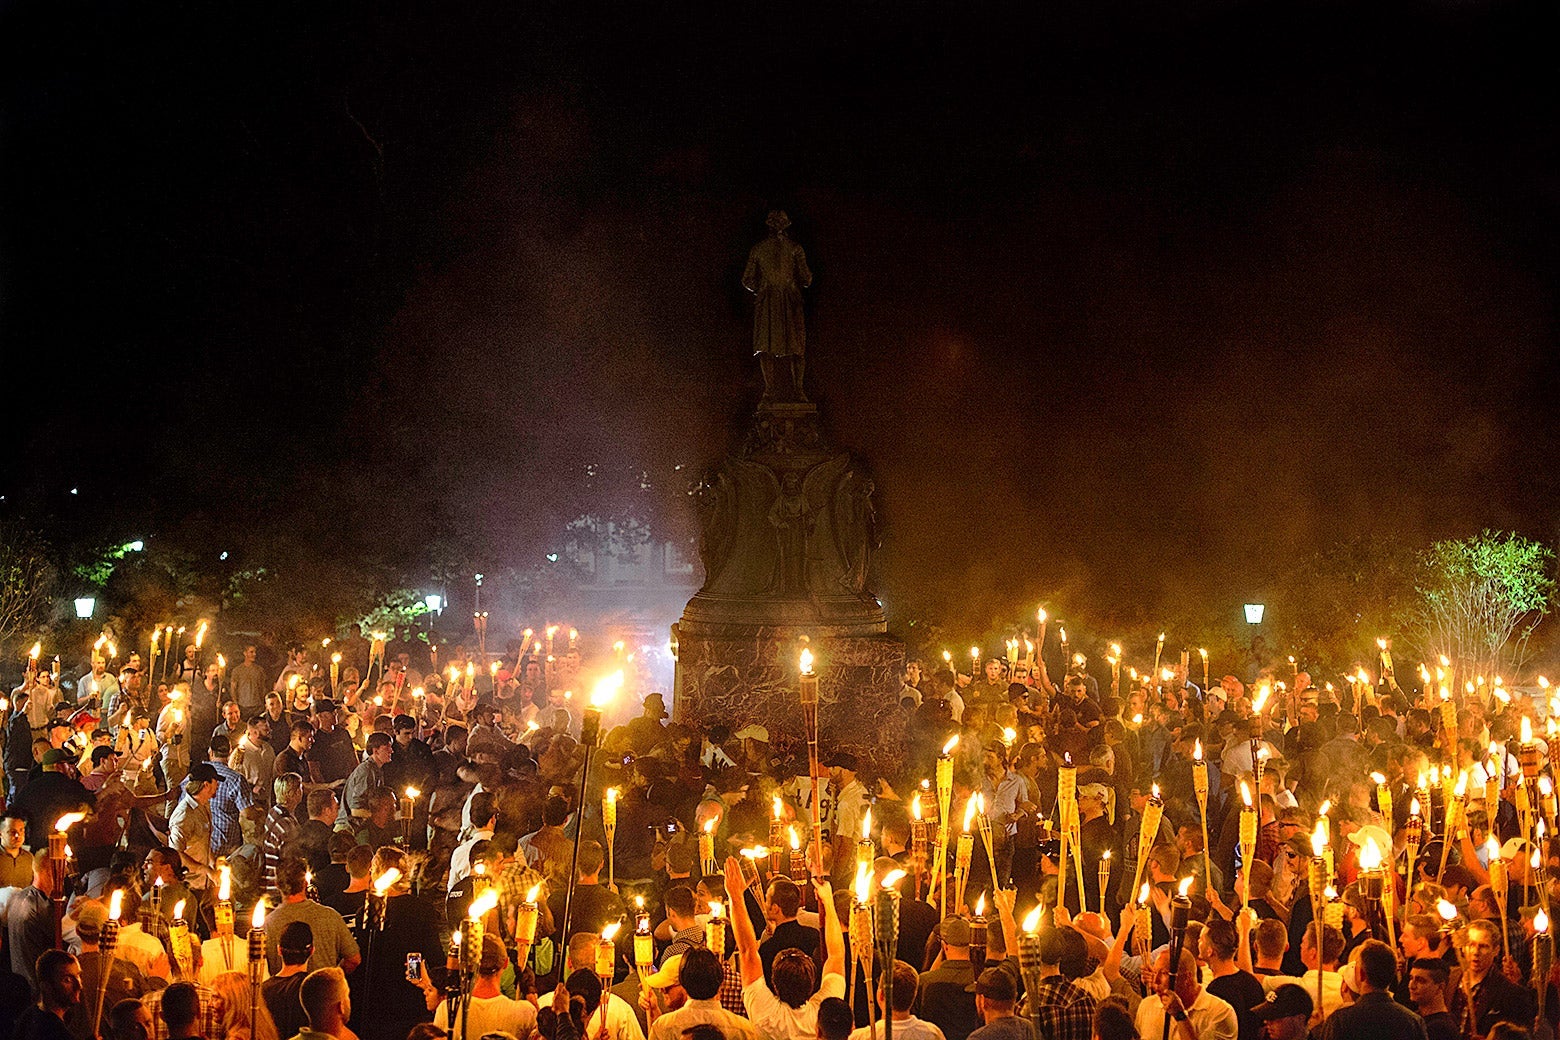 Alt-right protesters holding Tiki torches surround counterprotesters around a statue of Thomas Jefferson.